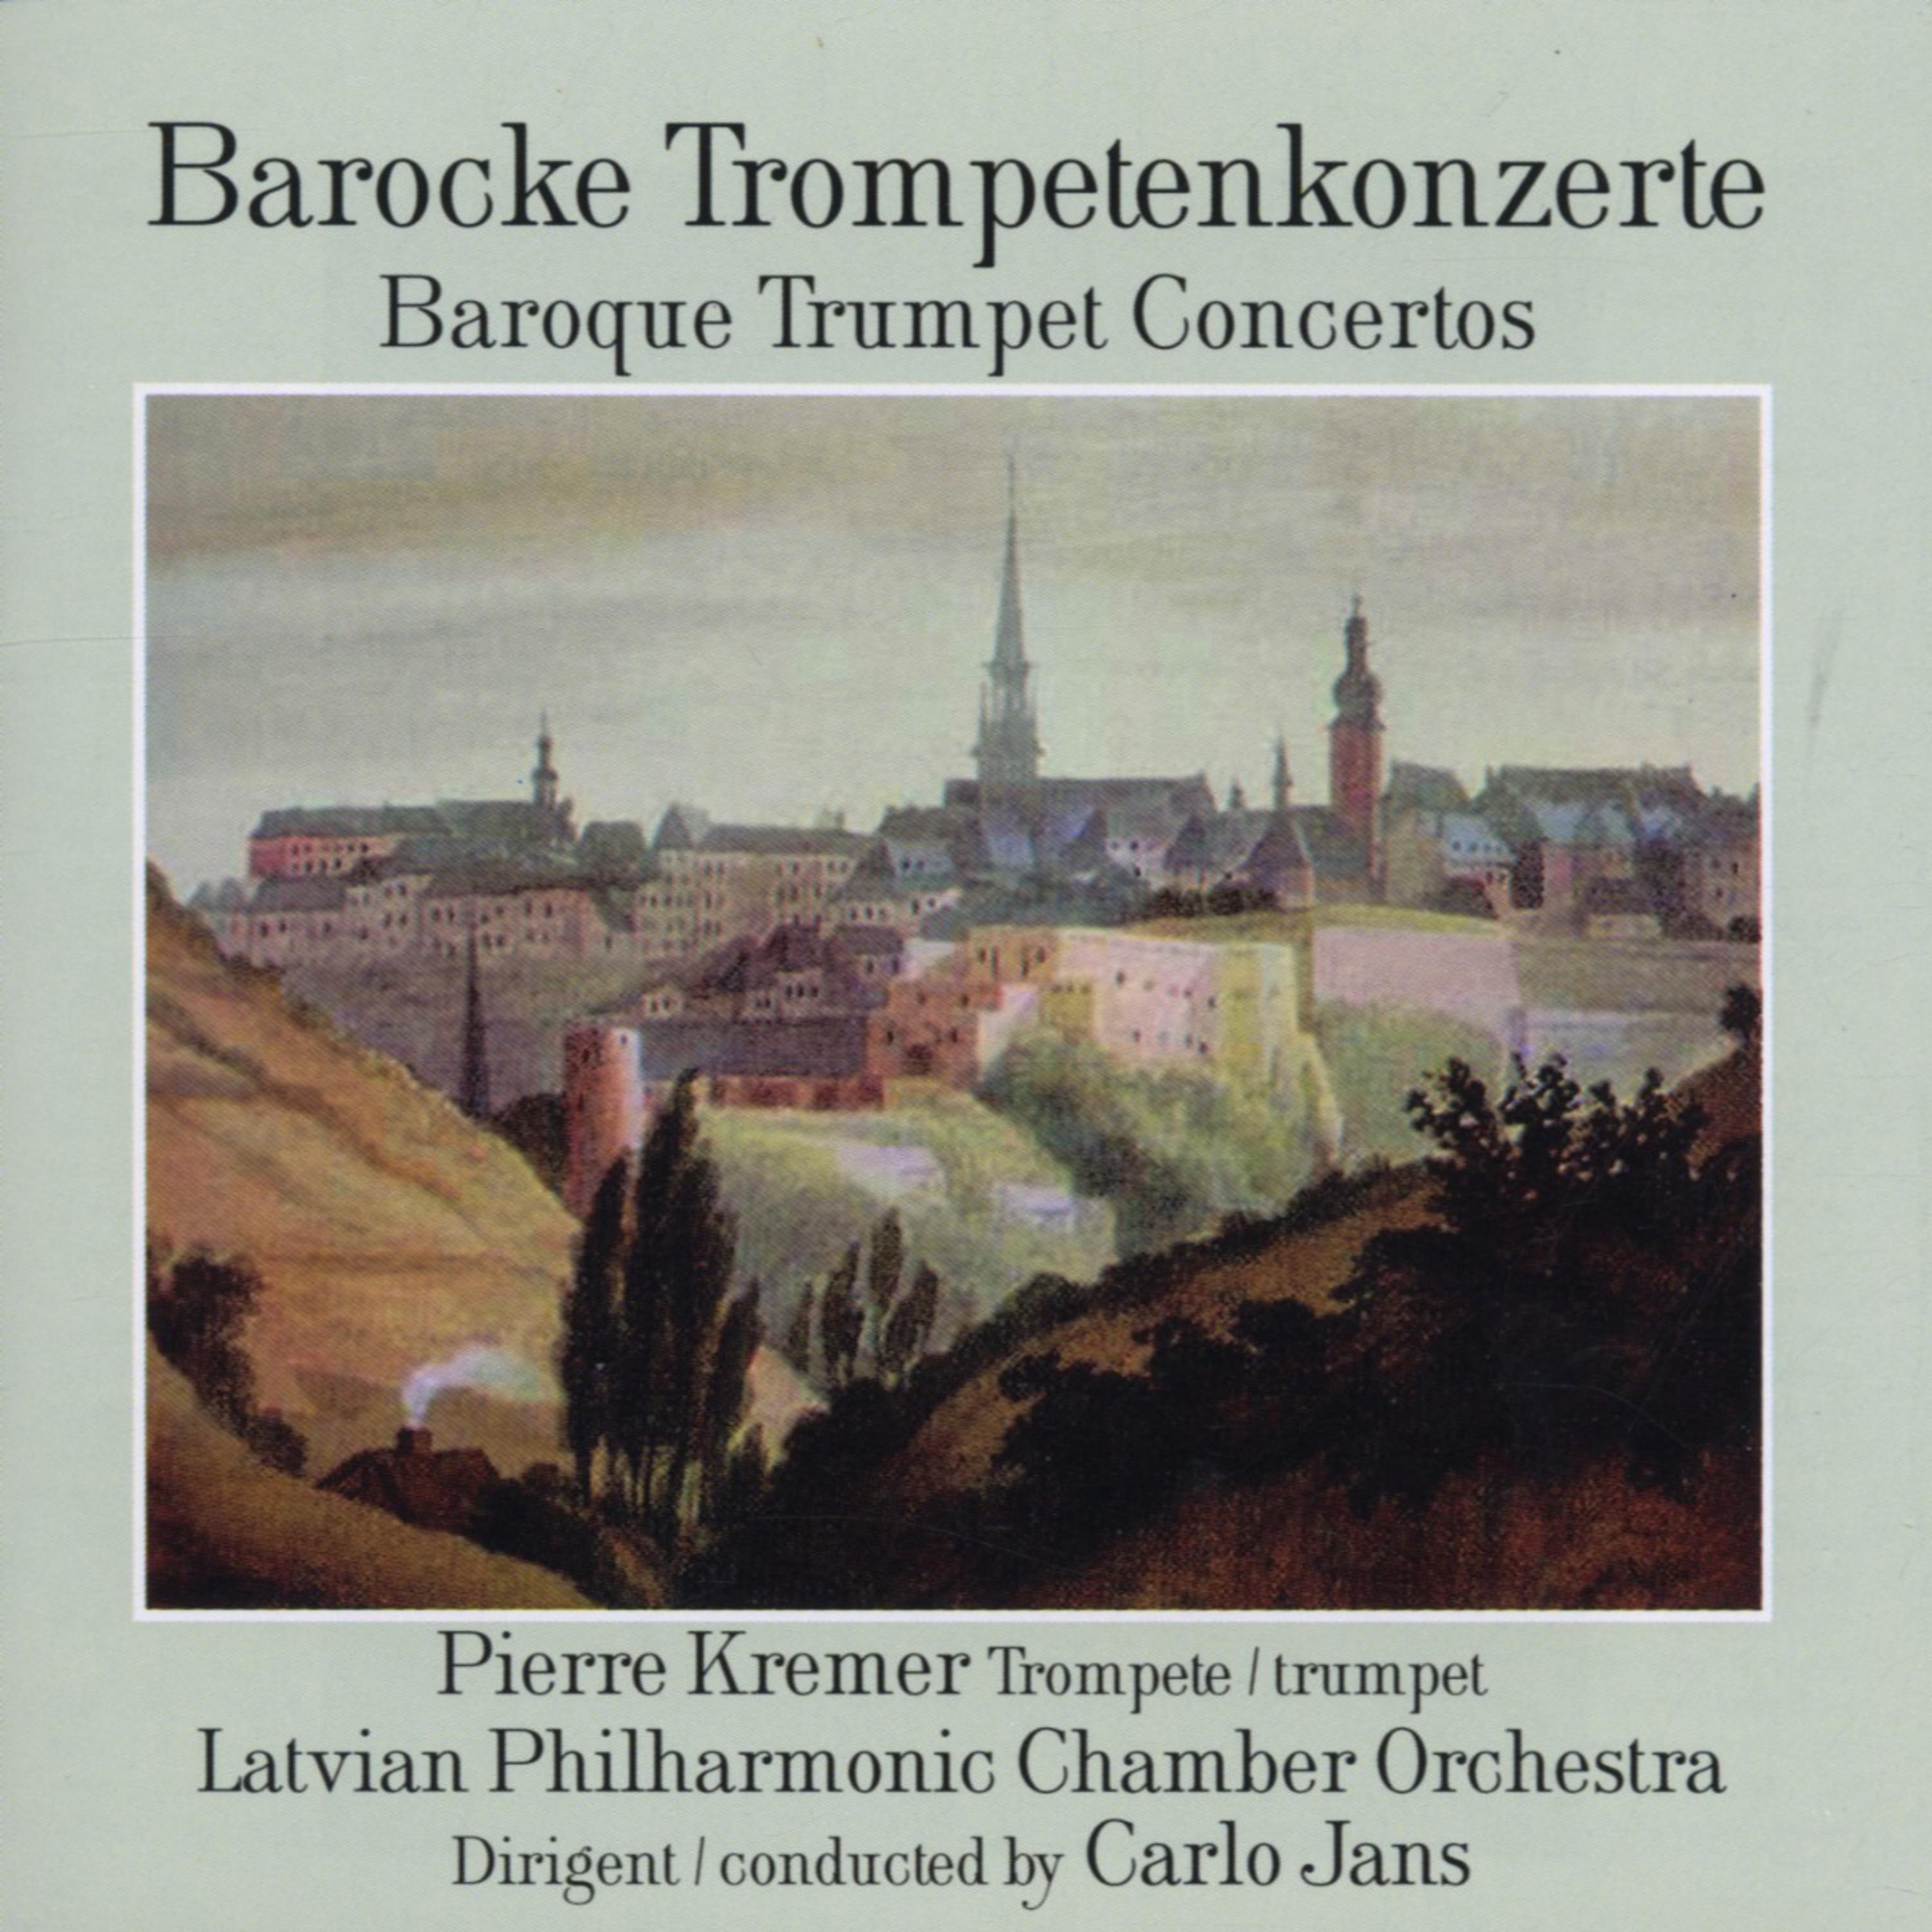 Concerto No. 3 for Orchestra and Trumpet in D Major, Op. 7, No. 6: II. Largo